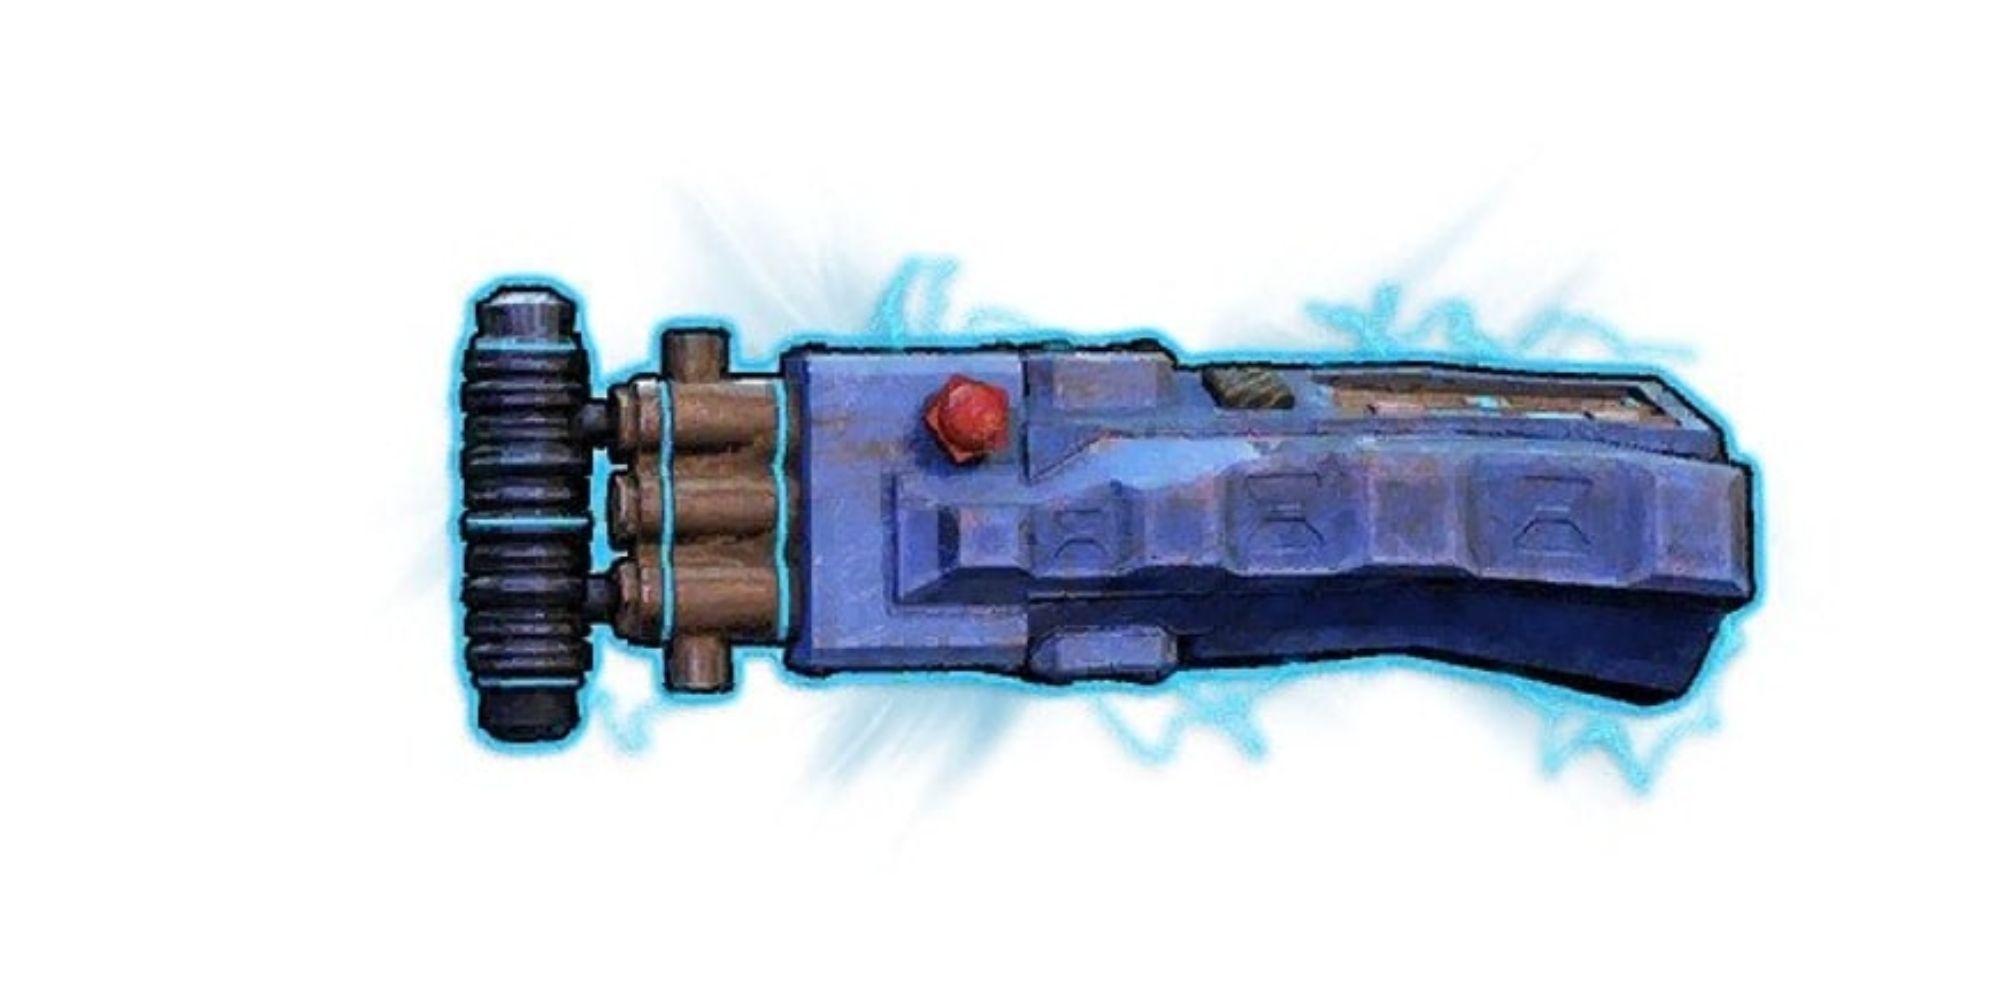 Close-up of Disruption Gauntlet weapon from Wasteland 3